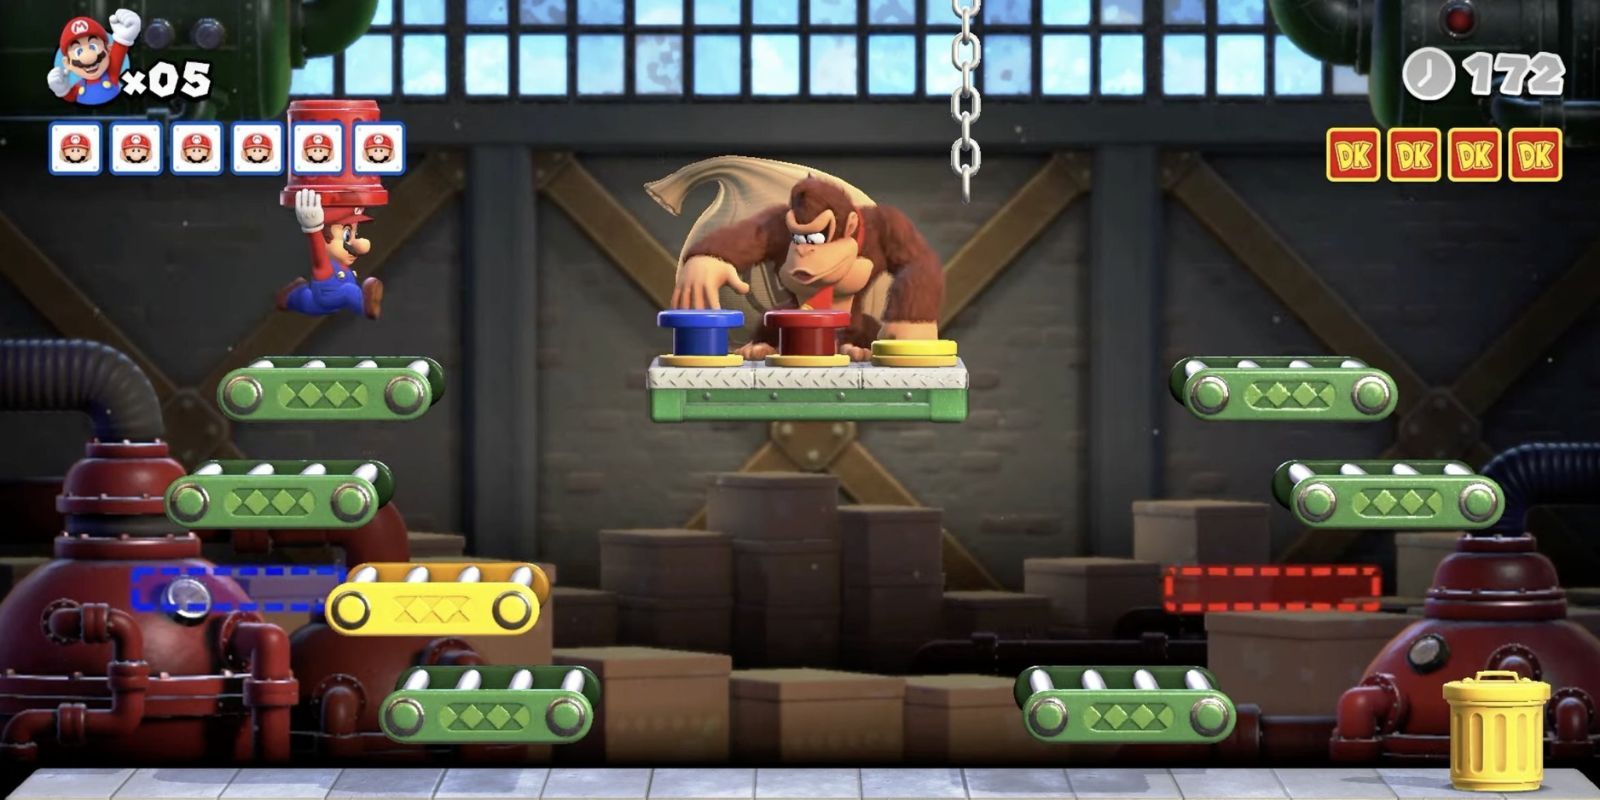 Mario vs. Donkey Kong release date and trailer